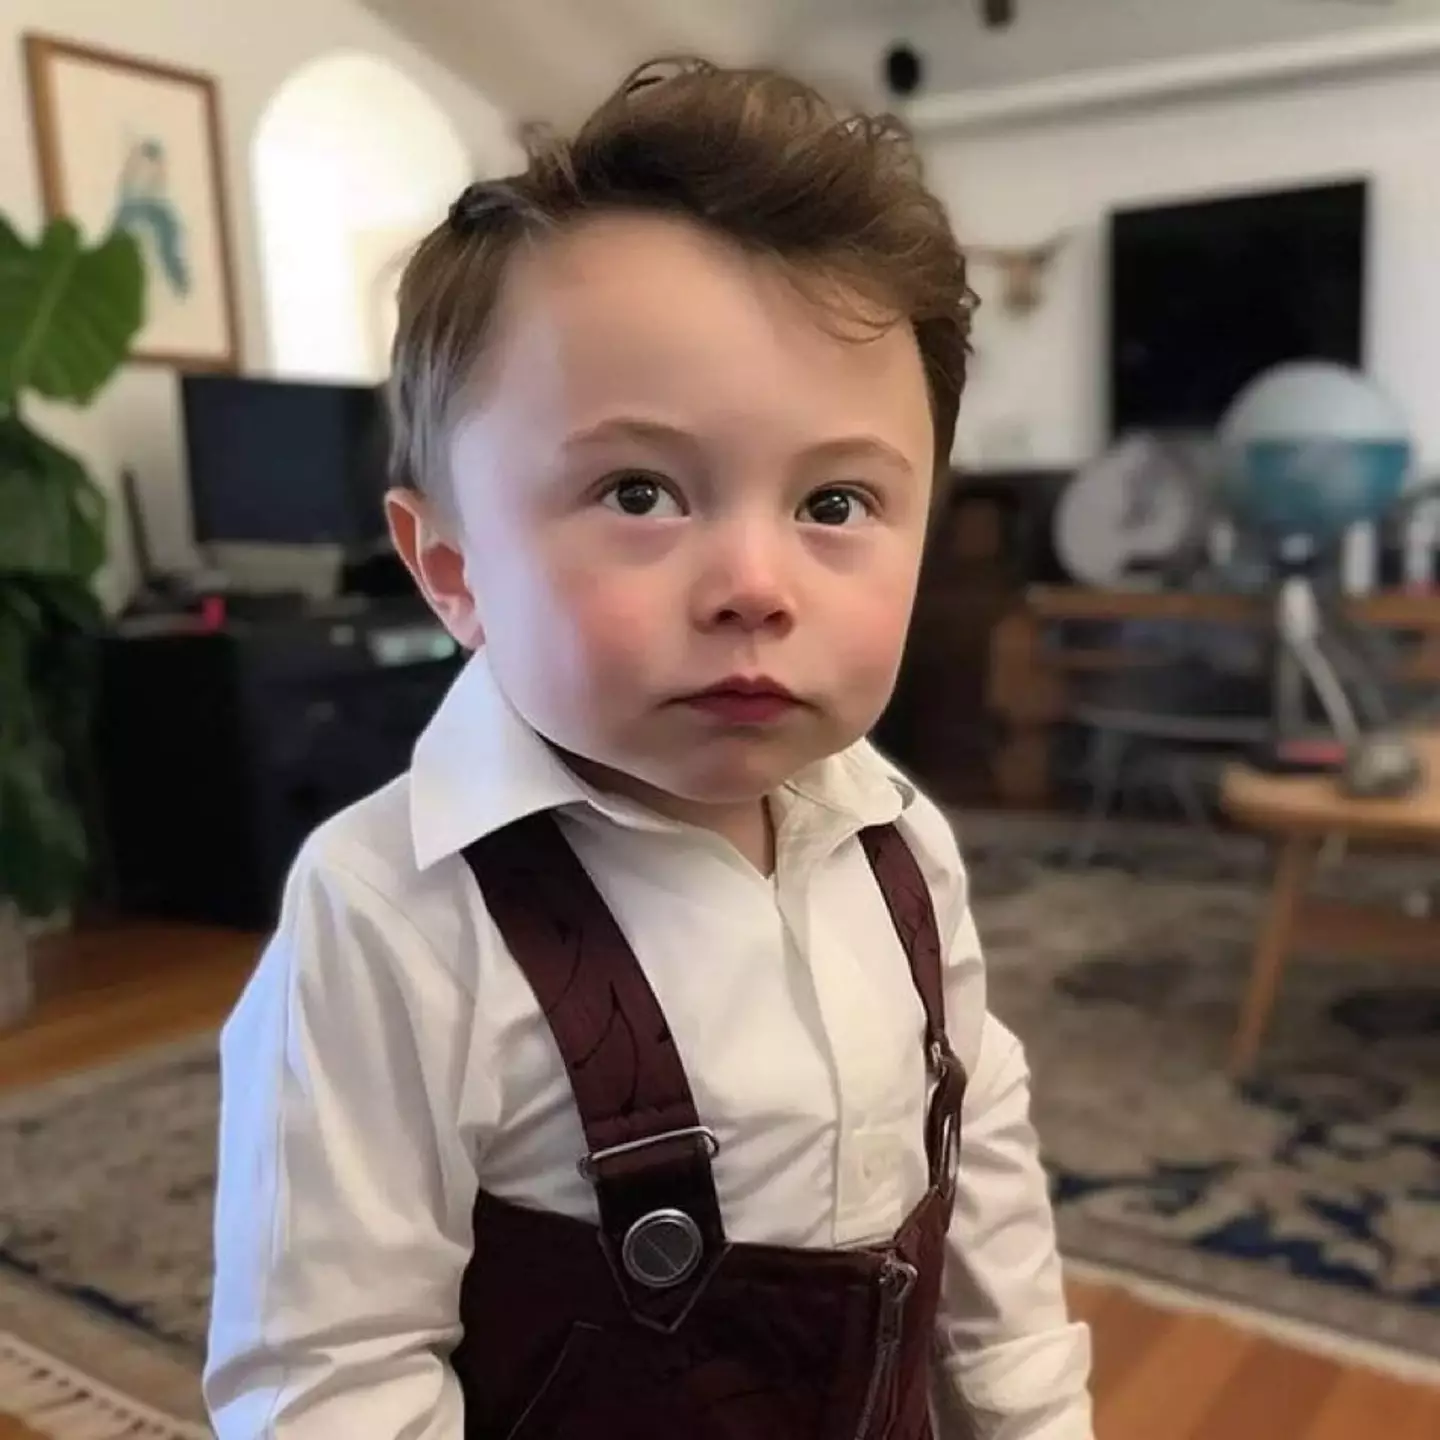 The AI-generated image shows a baby Elon Musk in a wide-collar shirt along with his trademark haircut.